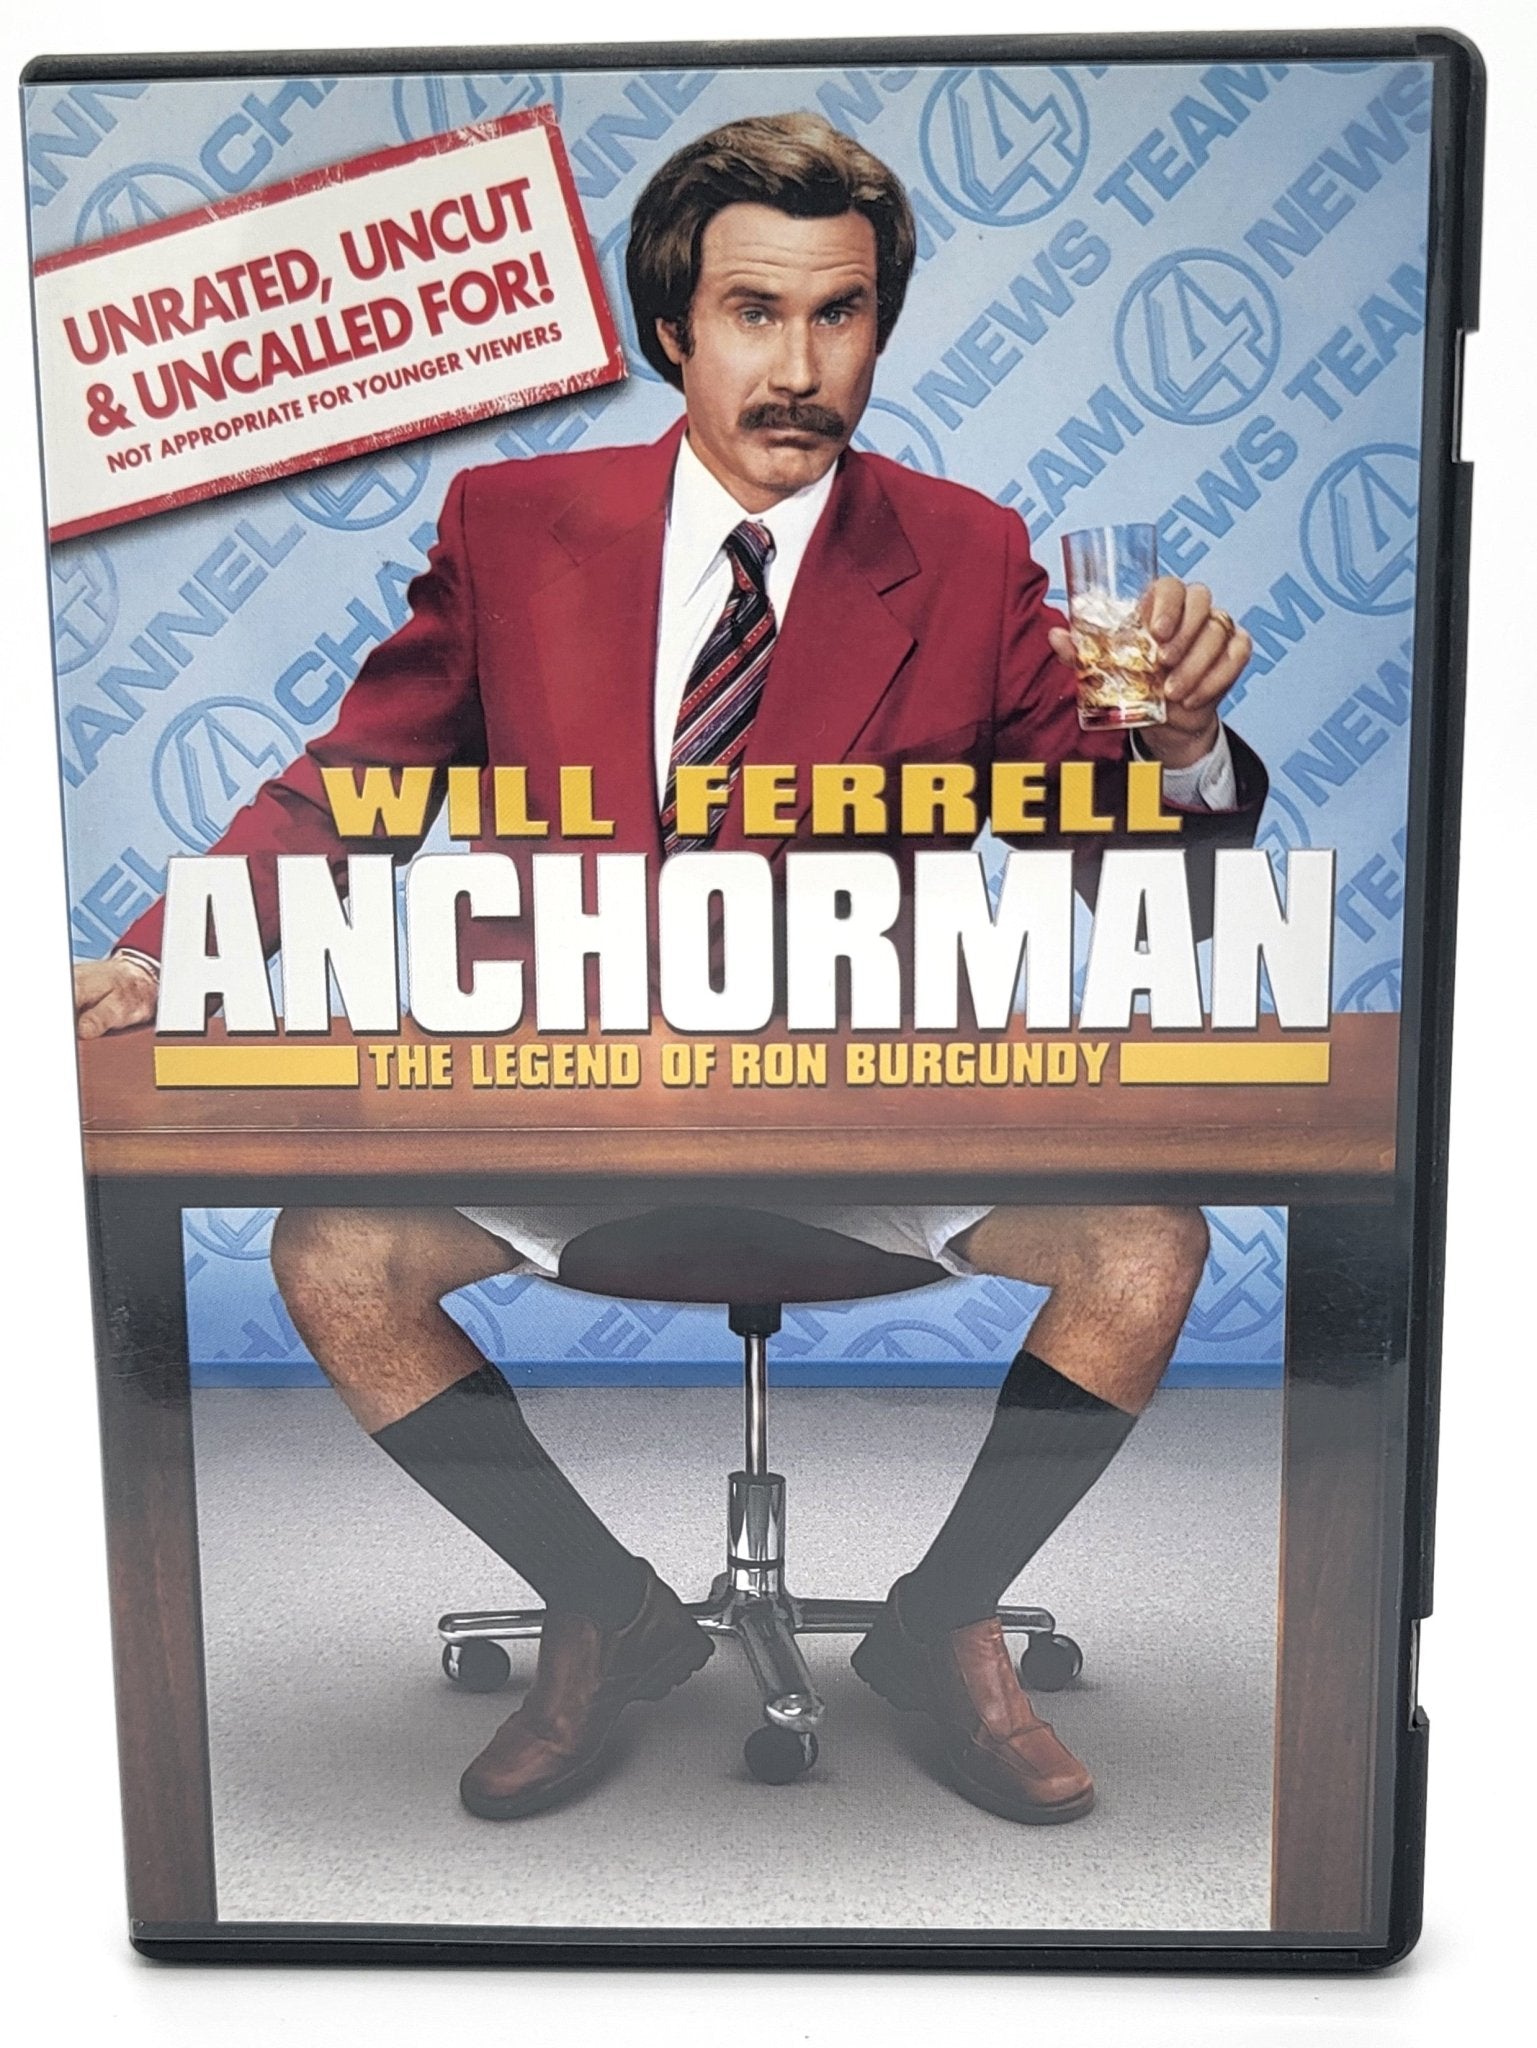 Paramount Pictures Home Entertainment - Anchorman | DVD | Unrated, Uncut, & Uncalled For | Widescreen - DVD - Steady Bunny Shop